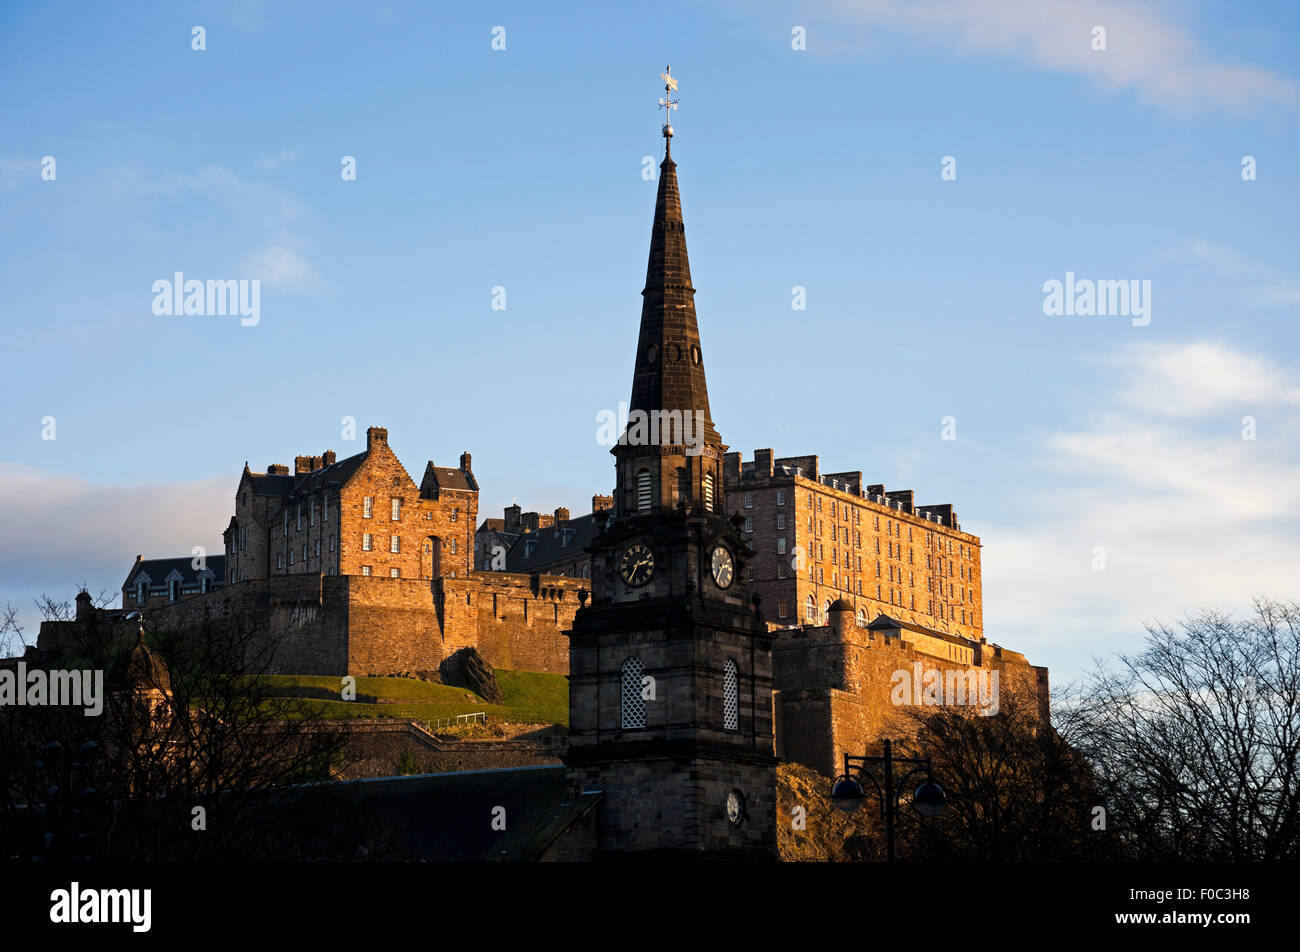 Steeple of St Cuthbert's church in the foreground with Edinburgh castle in the background In December, Scotland, UK, Europe Stock Photo